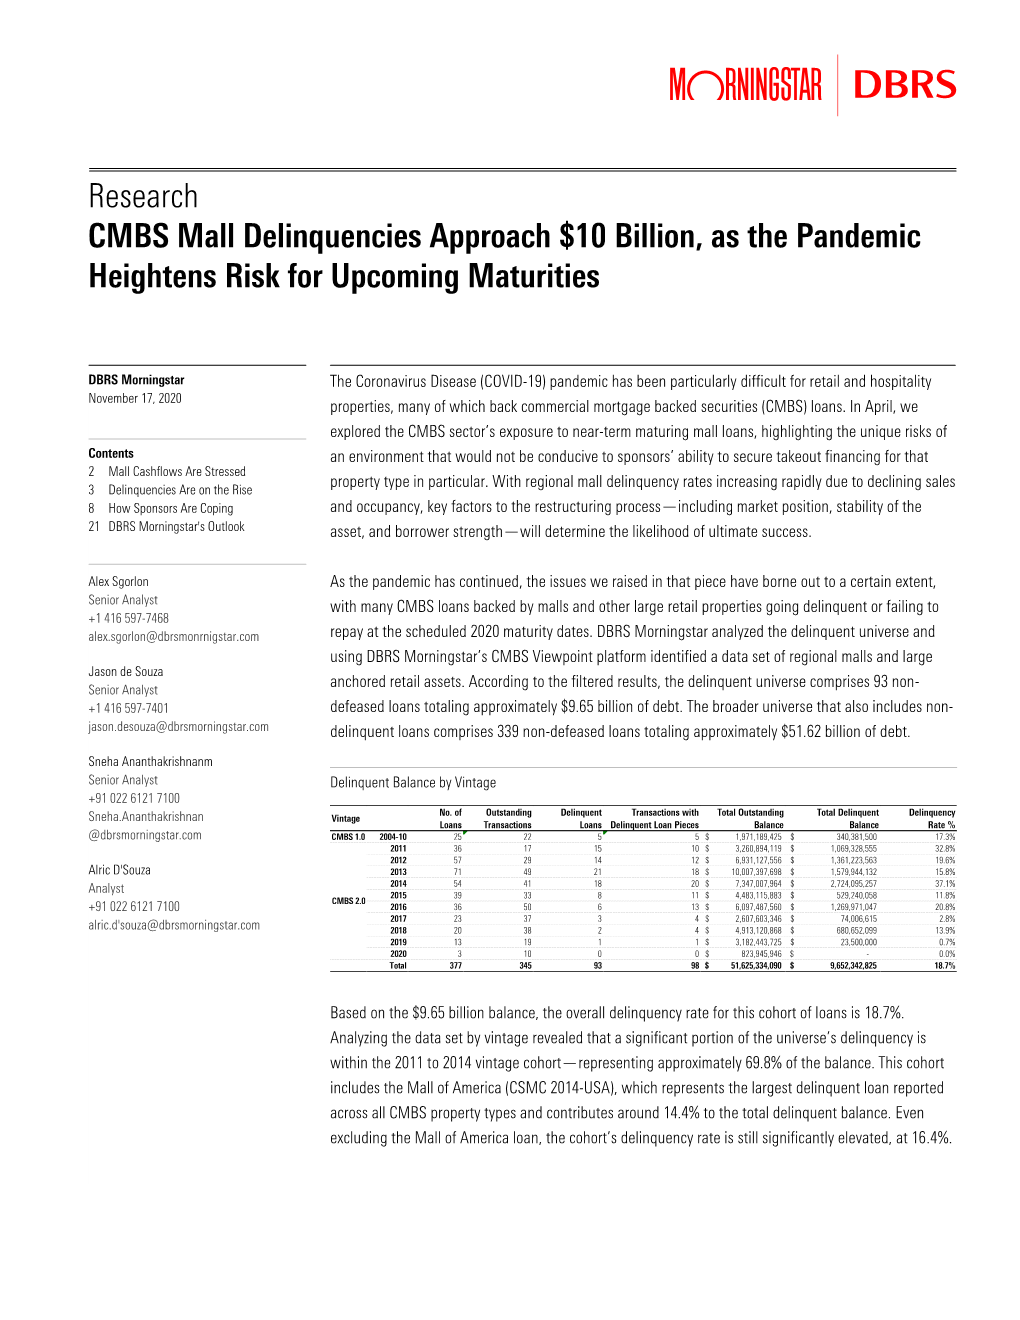 CMBS Mall Delinquencies Approach $10 Billion, As the Pandemic Heightens Risk for Upcoming Maturities